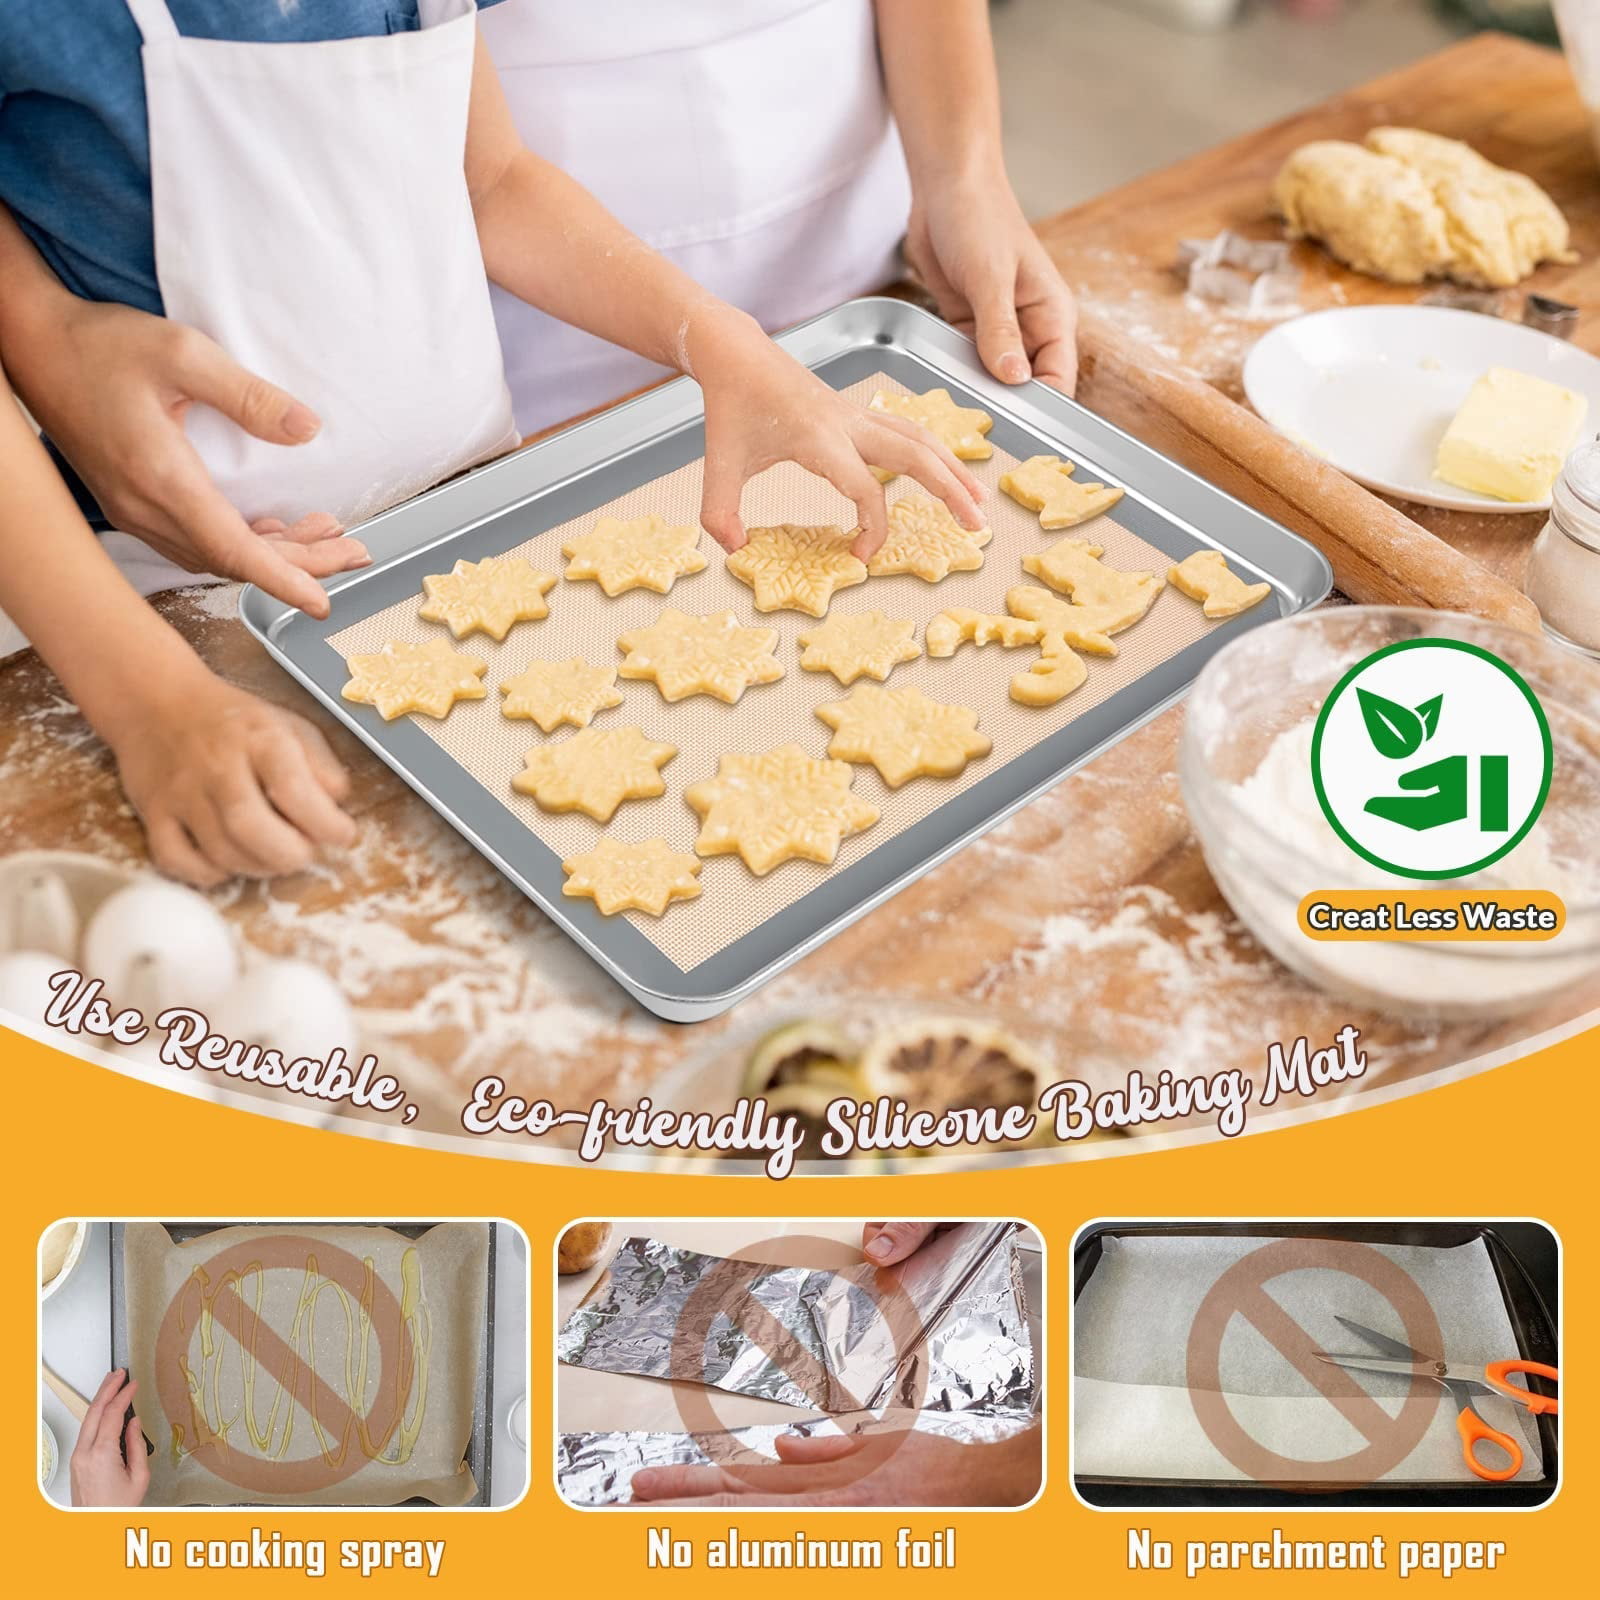 Baking Sheet with Wire Rack Set, Zacfton Stainless Steel Cookie Sheet  Baking Pan Toaster Oven Tray with Cooling Rack, 12.4 x 10 x 1 Inch Quarter  Sheet